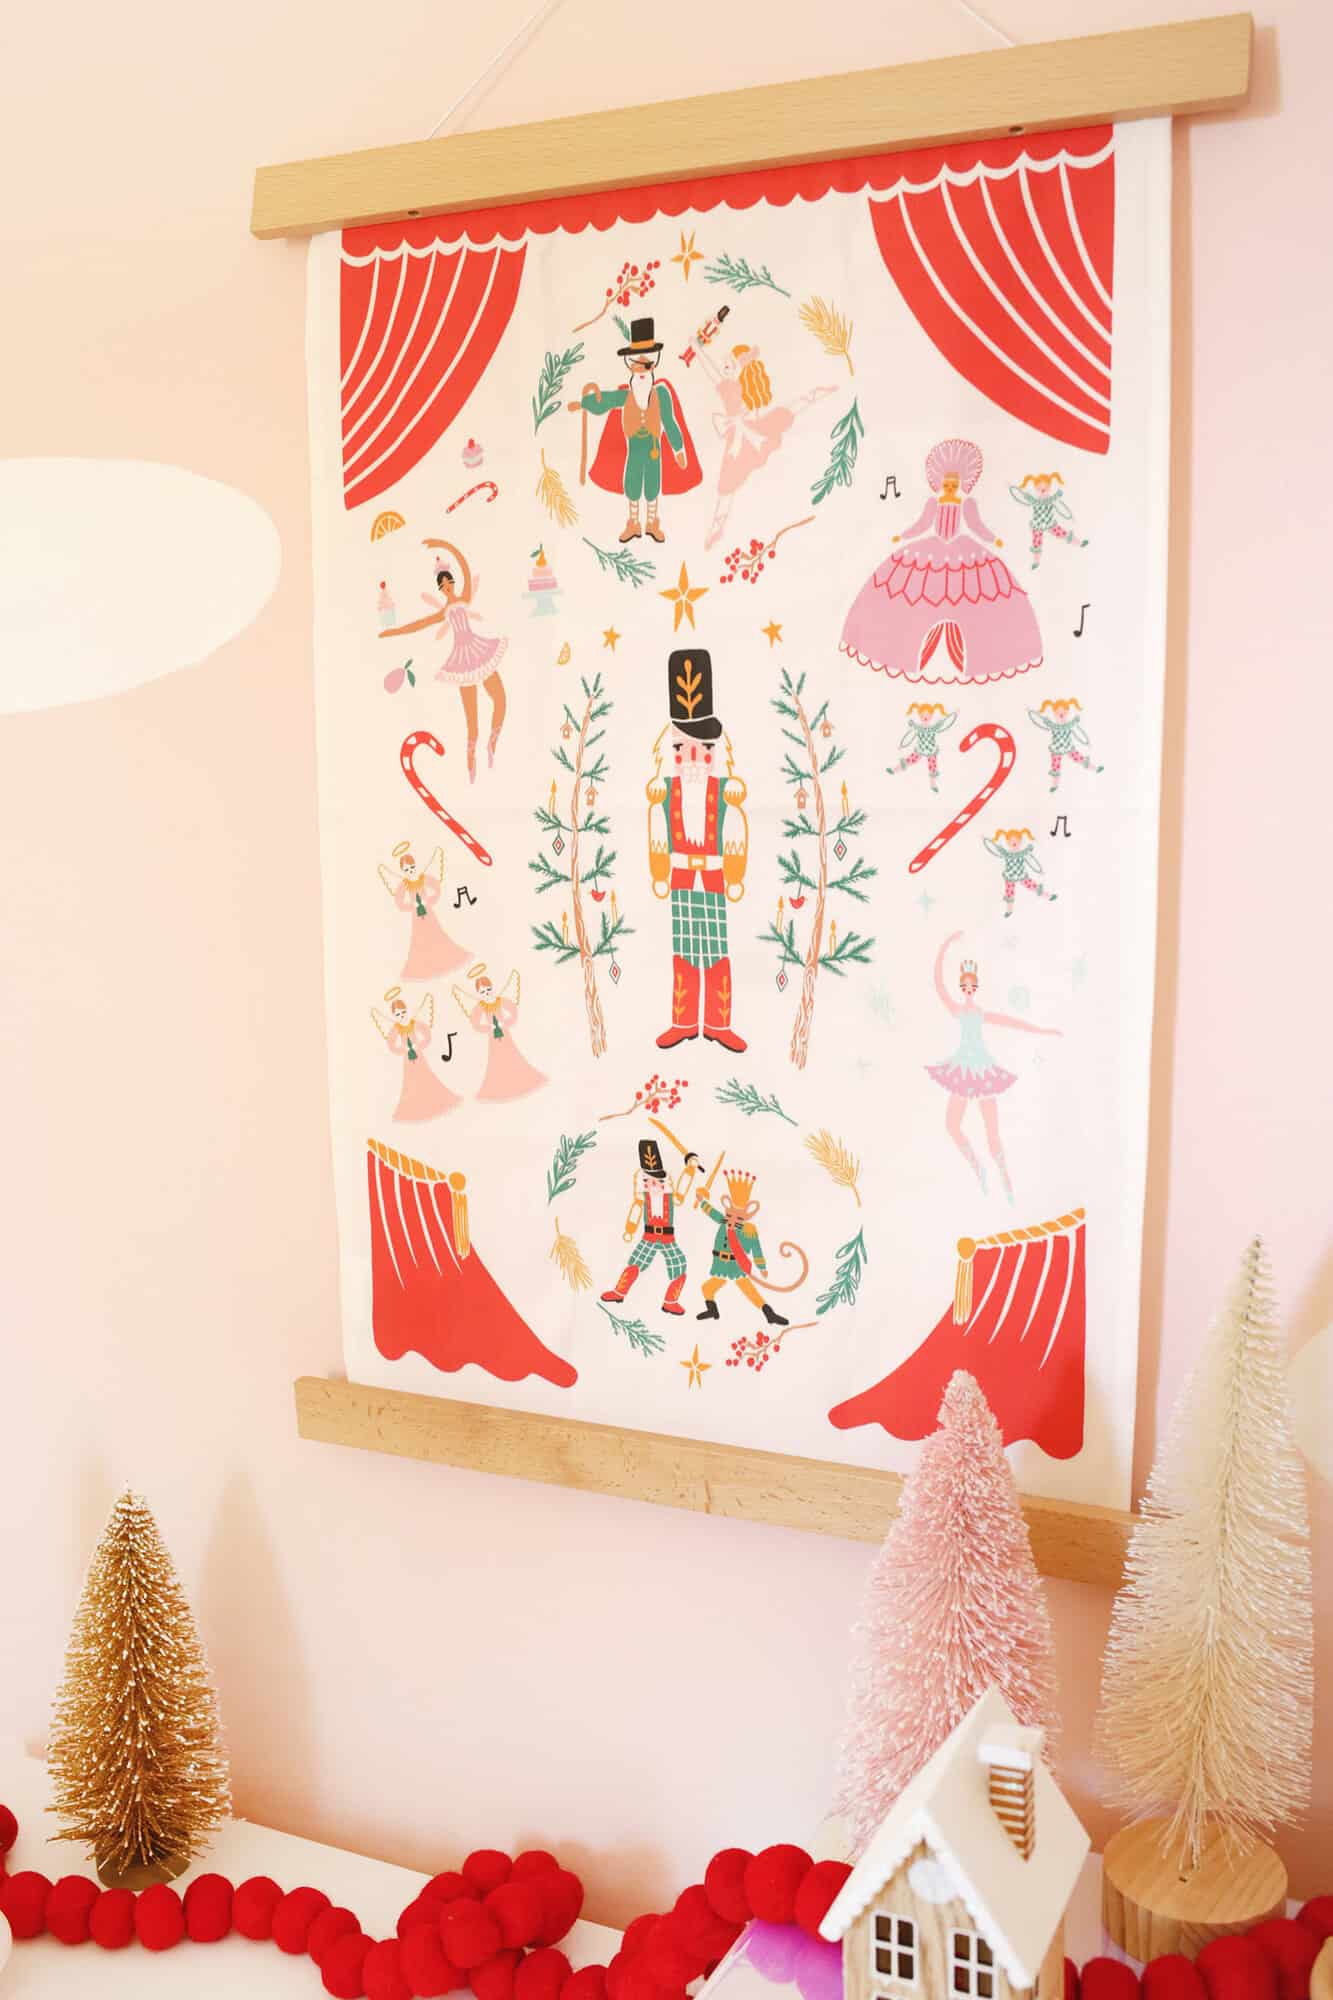 Christmas wall hanging in a children's room